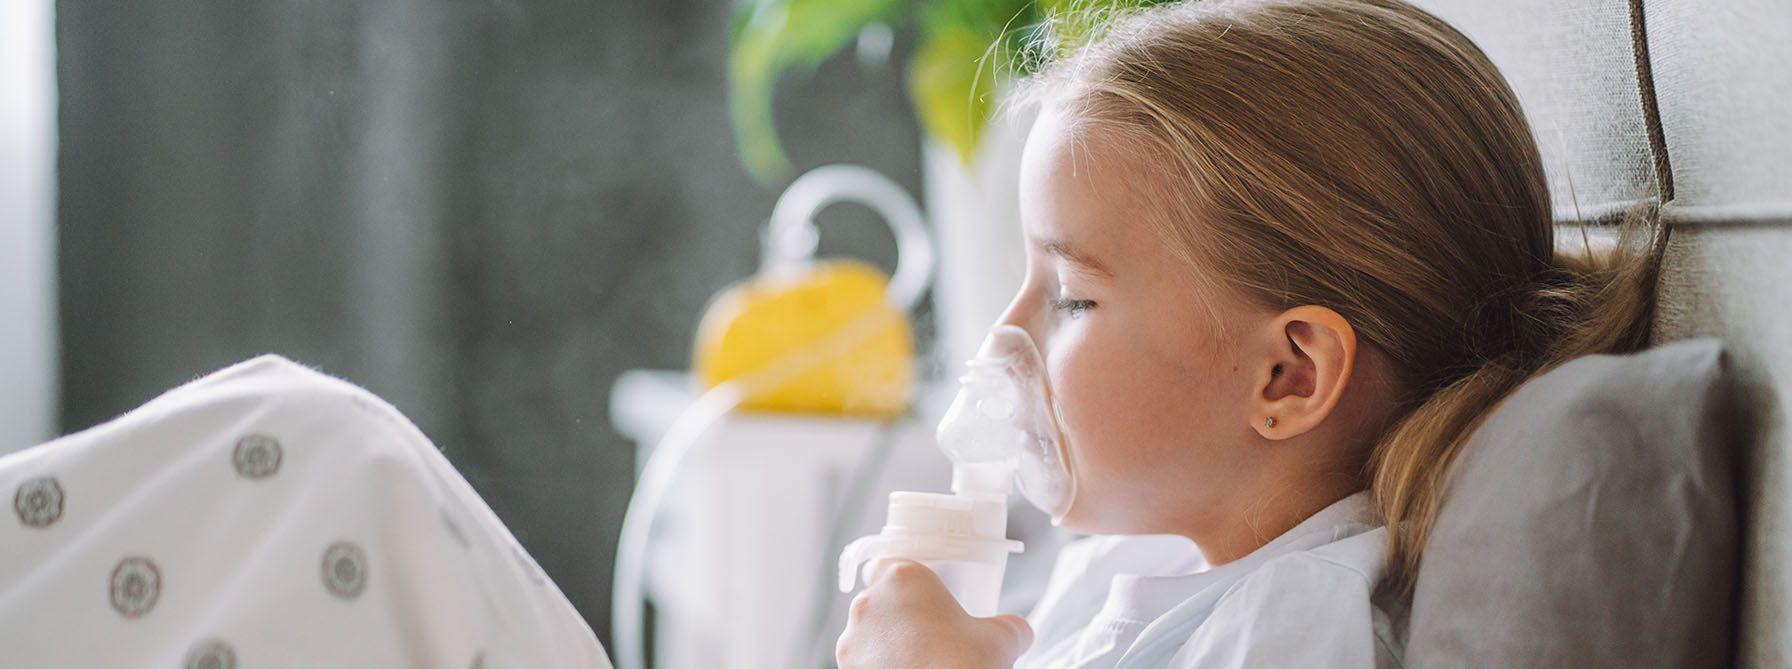 How to Clean Nebulizer Tubing and Mask